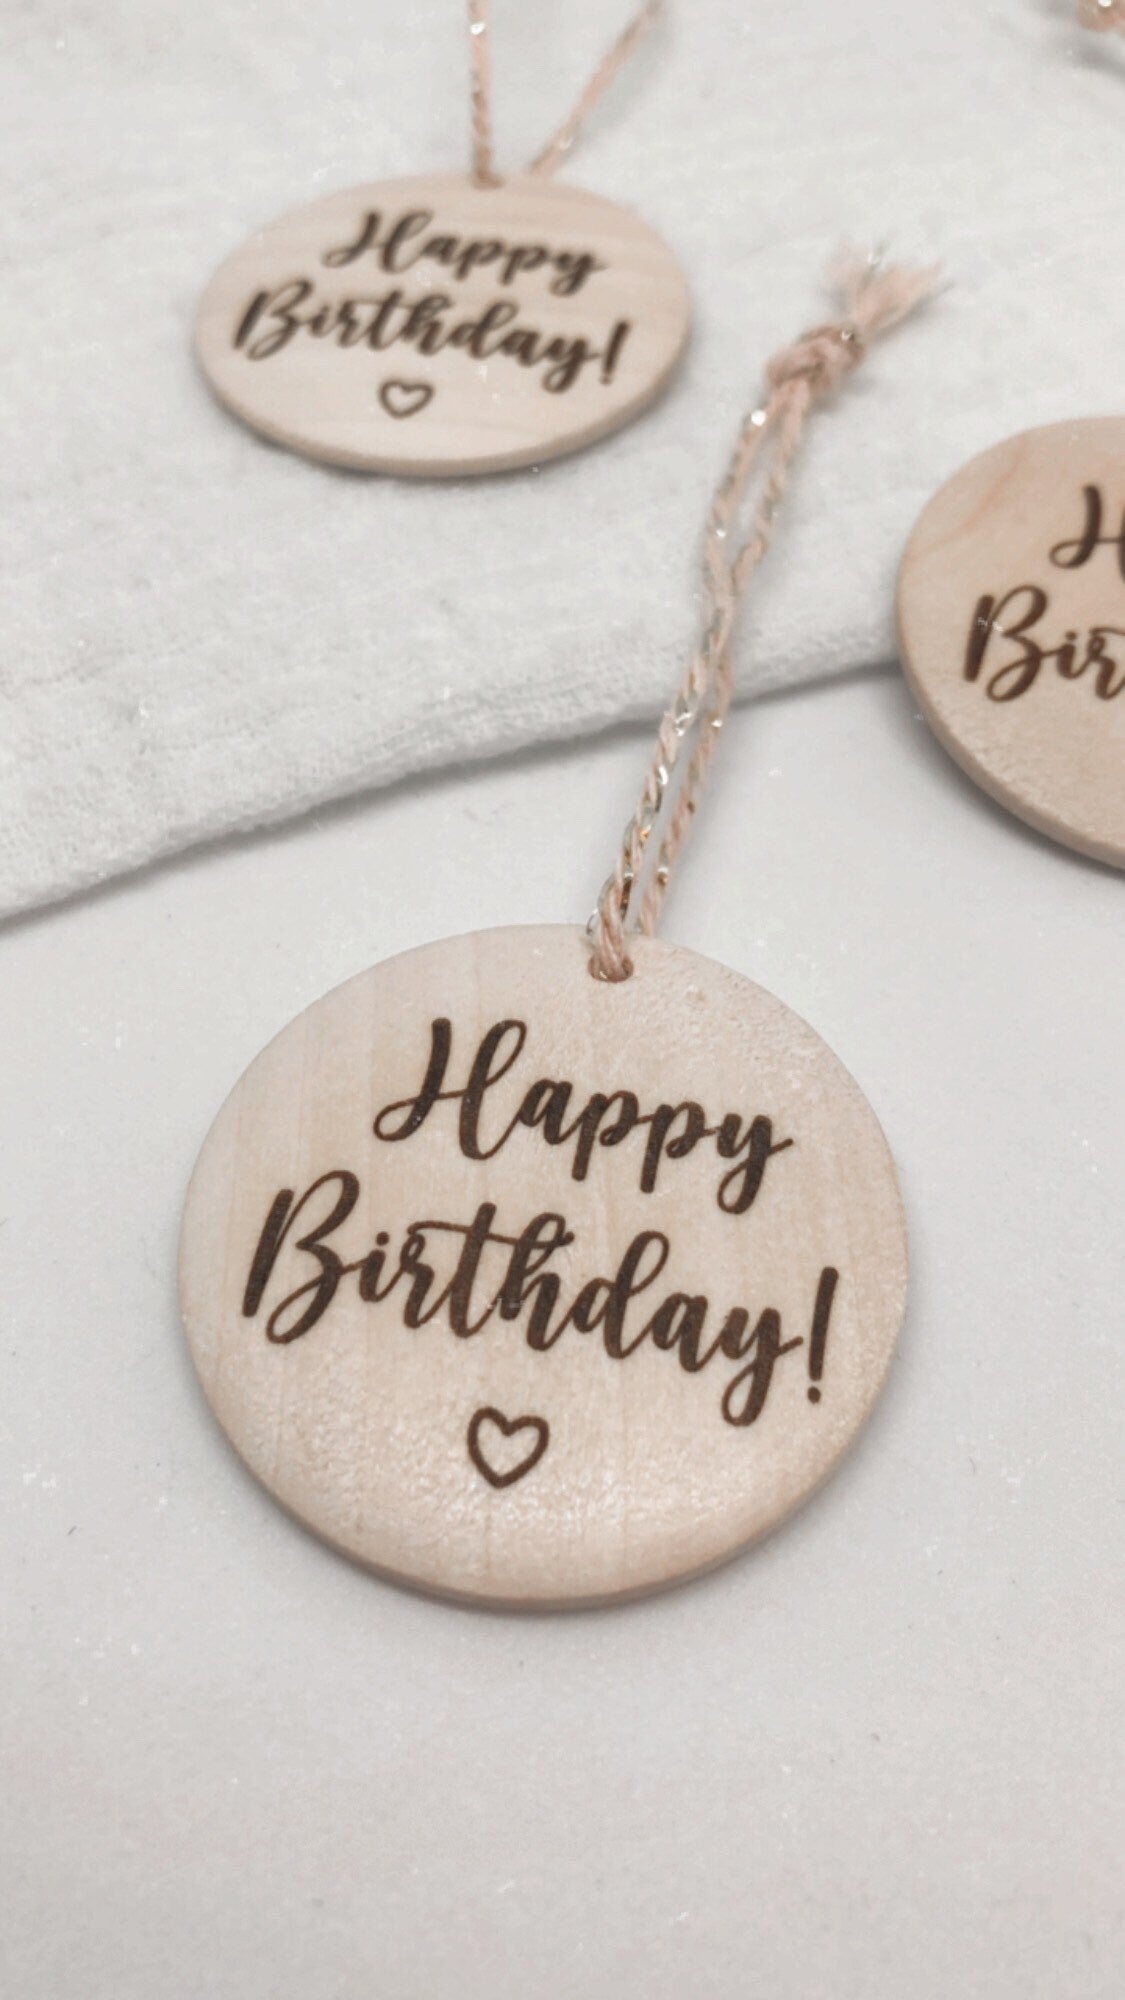 Wooden Happy Birthday gift tag